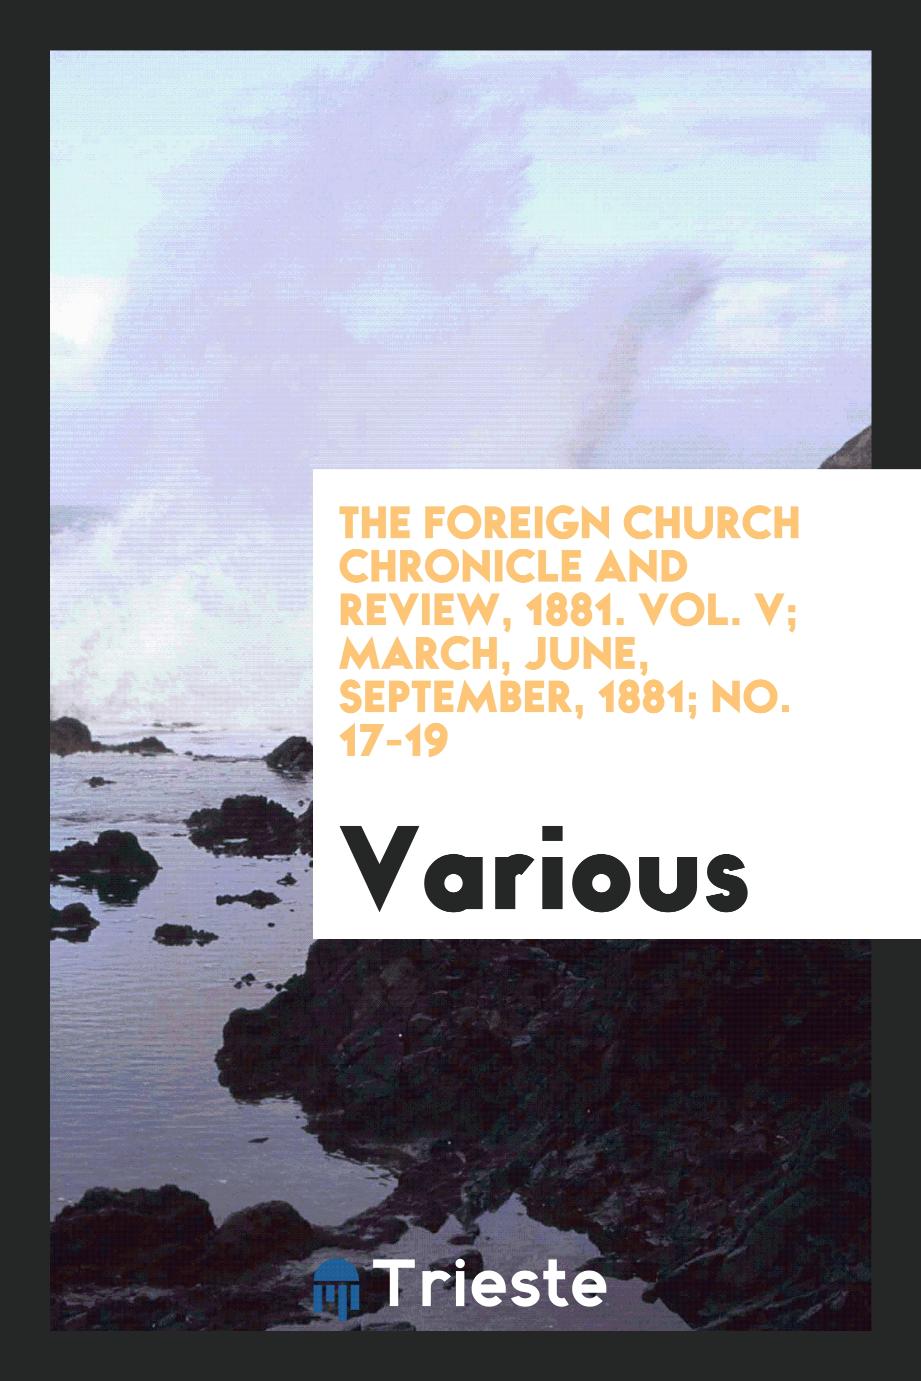 The Foreign Church Chronicle and Review, 1881. Vol. V; March, June, September, 1881; No. 17-19